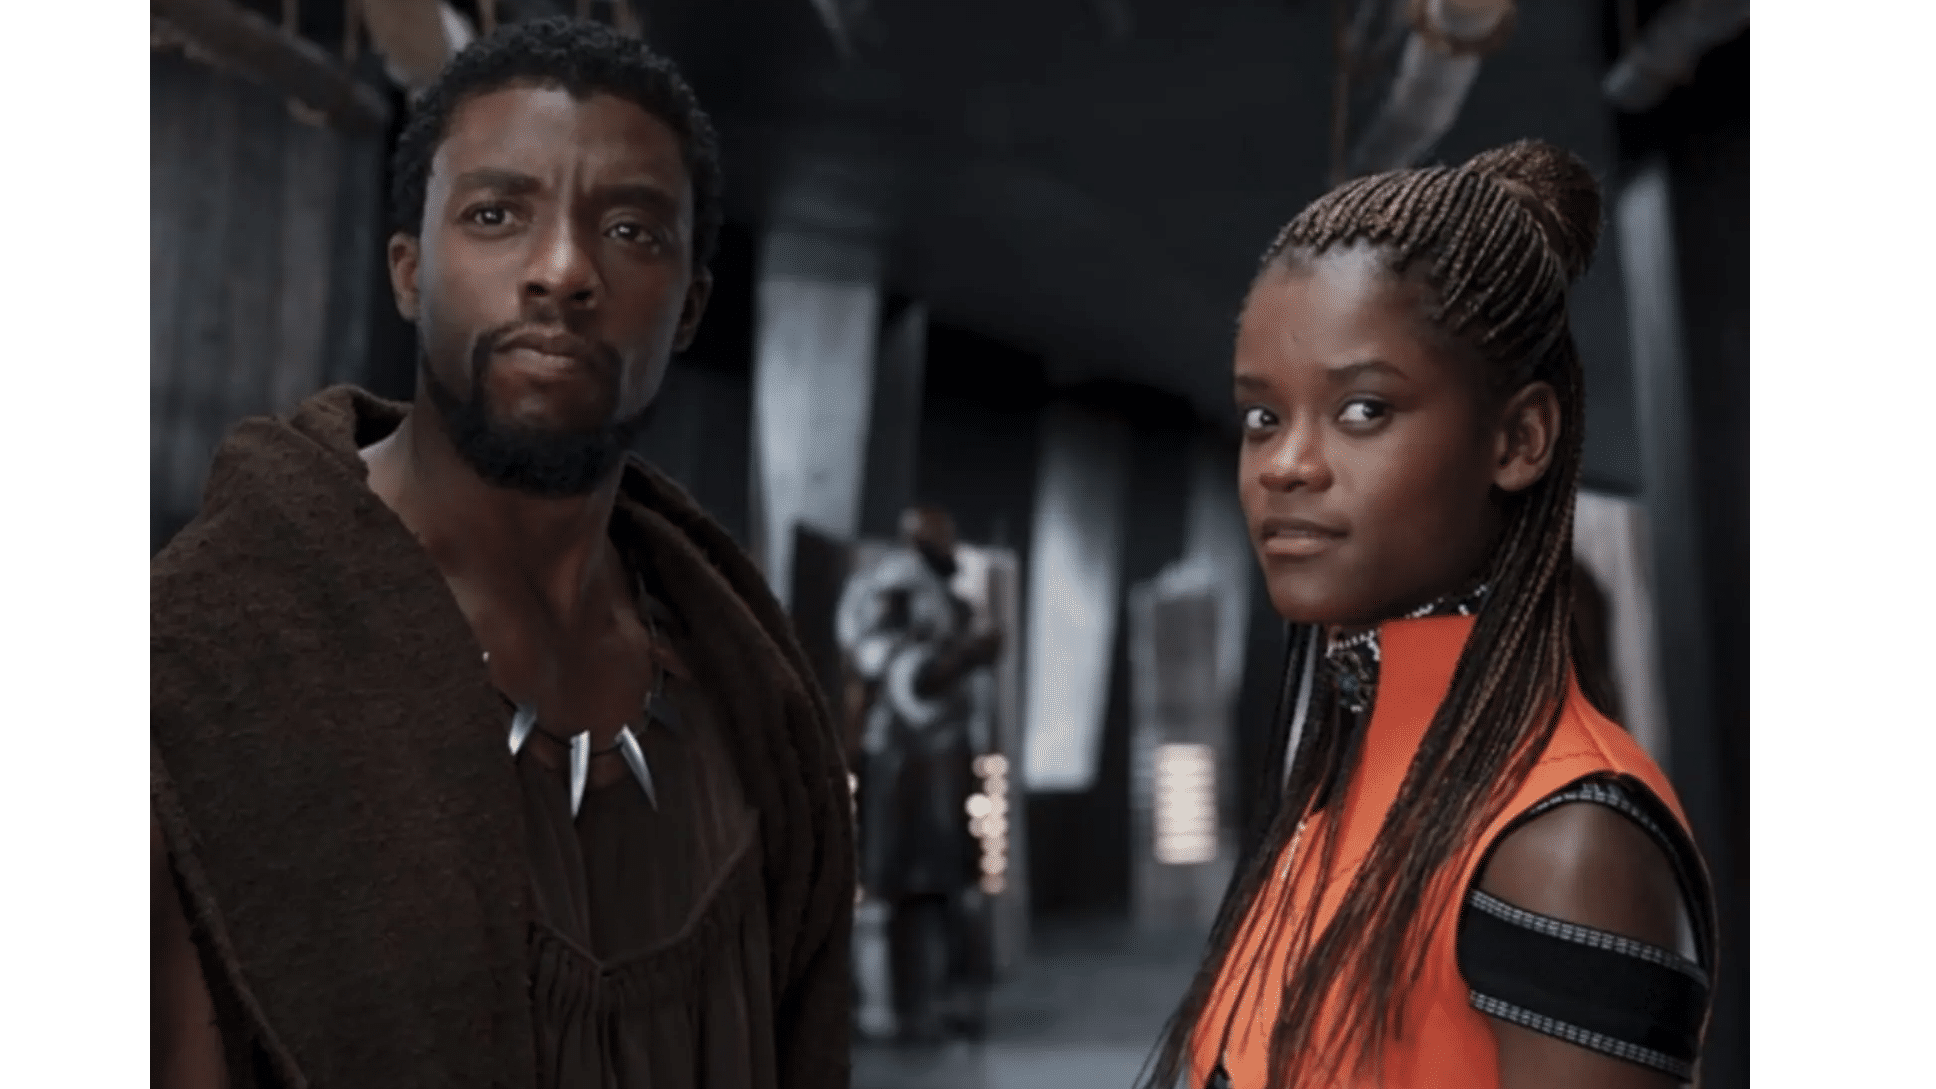 Black Panther upcoming movies & shows in development